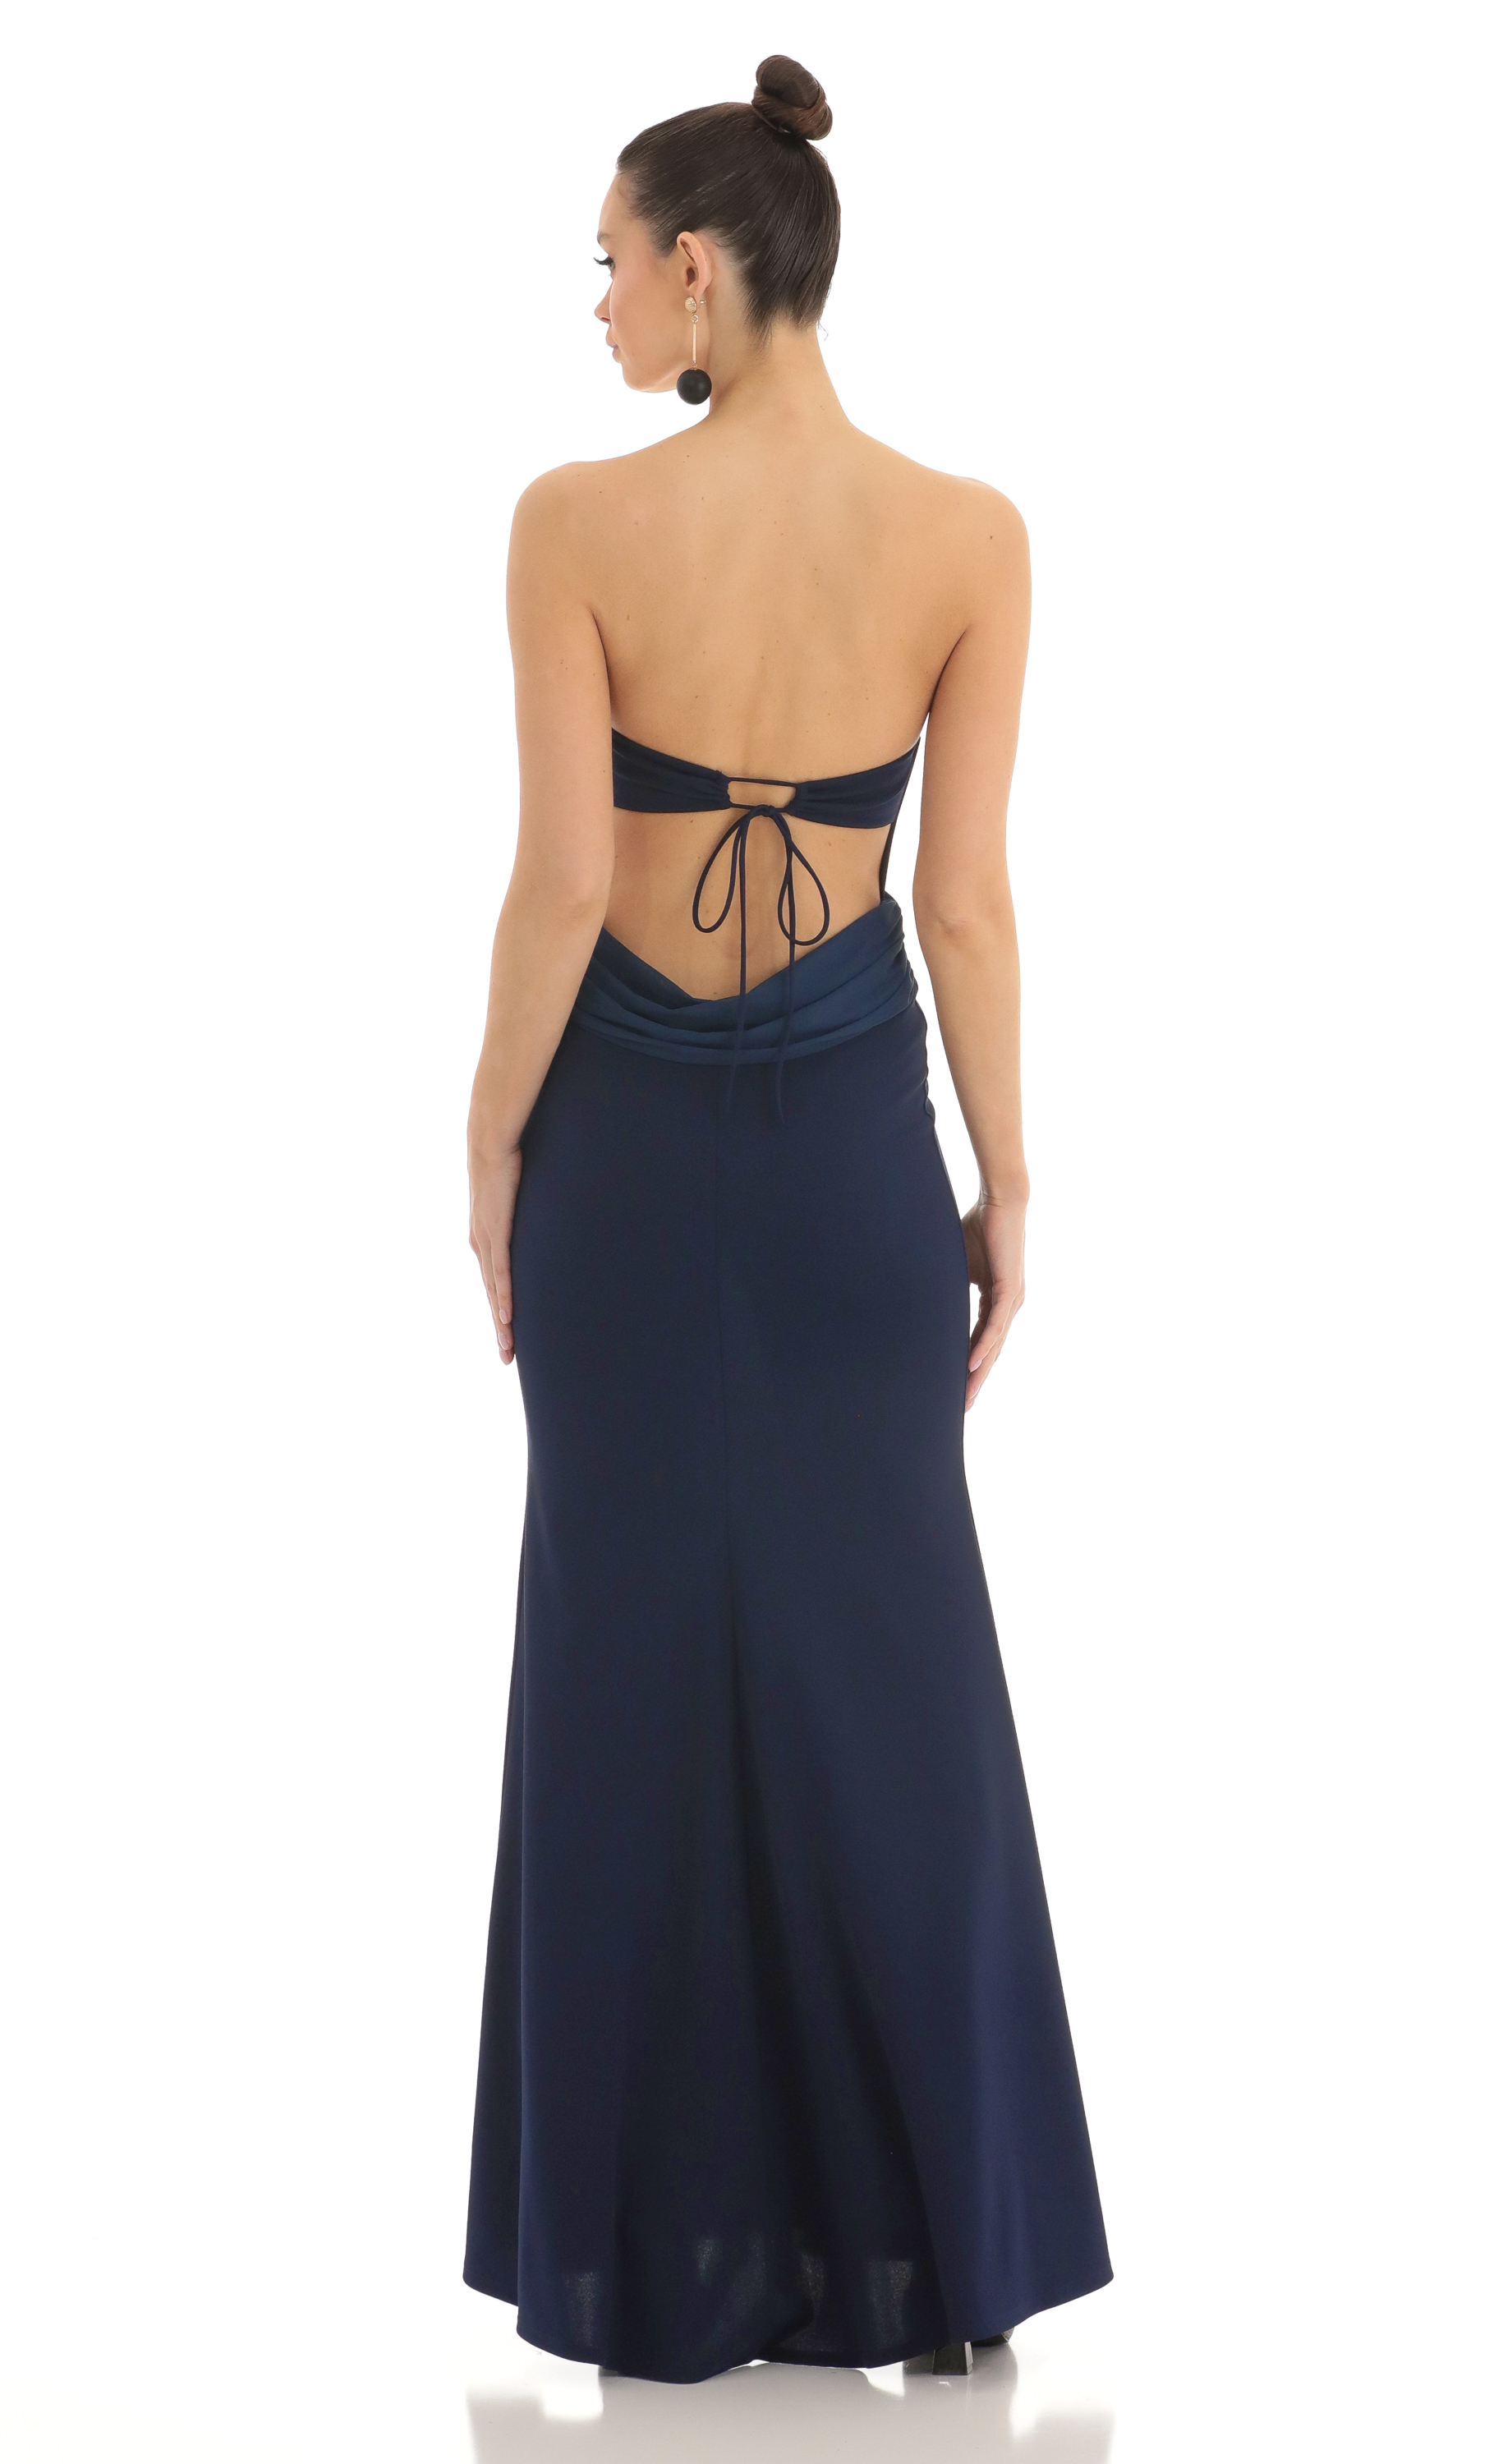 Strapless Corset Maxi Dress in Navy